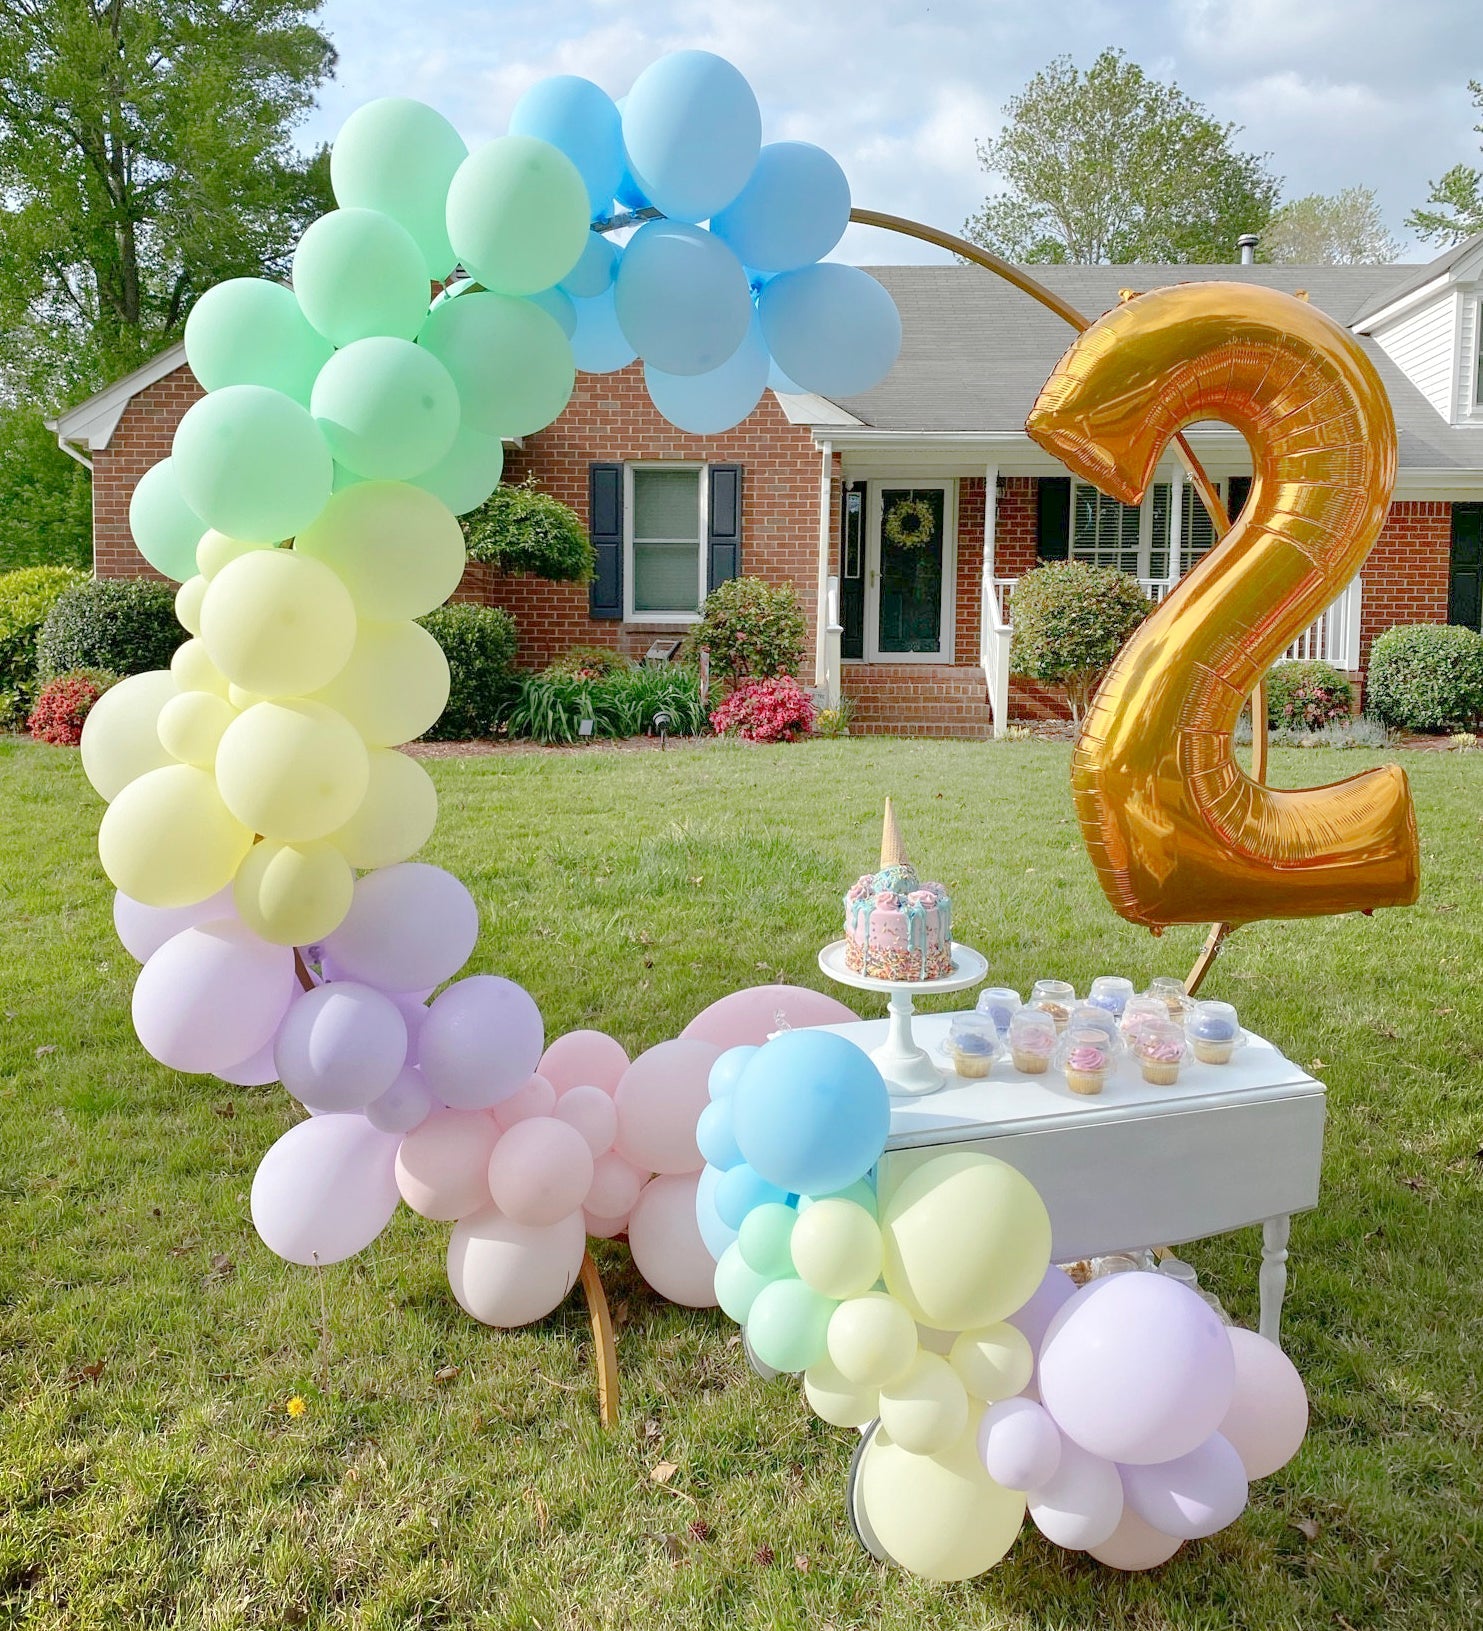 Top Six 2nd Birthday Party Themes – Ellie's Party Supply